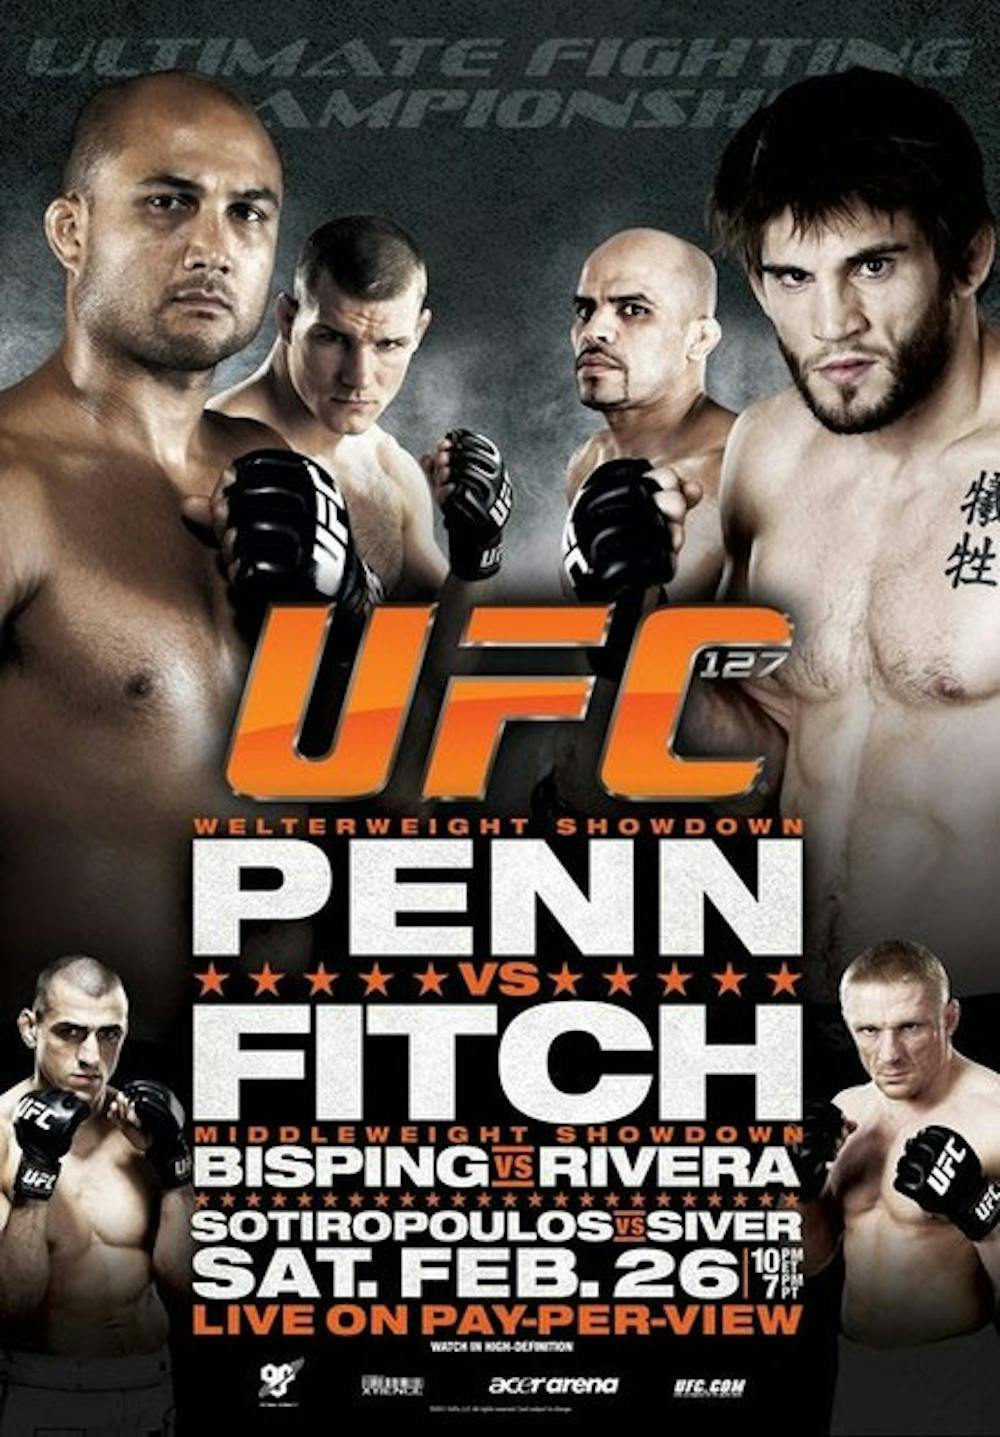 (photo courtesy of www.technotrix.com) UFC 127's big fight of the night, Penn vs. Fitch, doesn't interest many outside the extreme fighting realm.